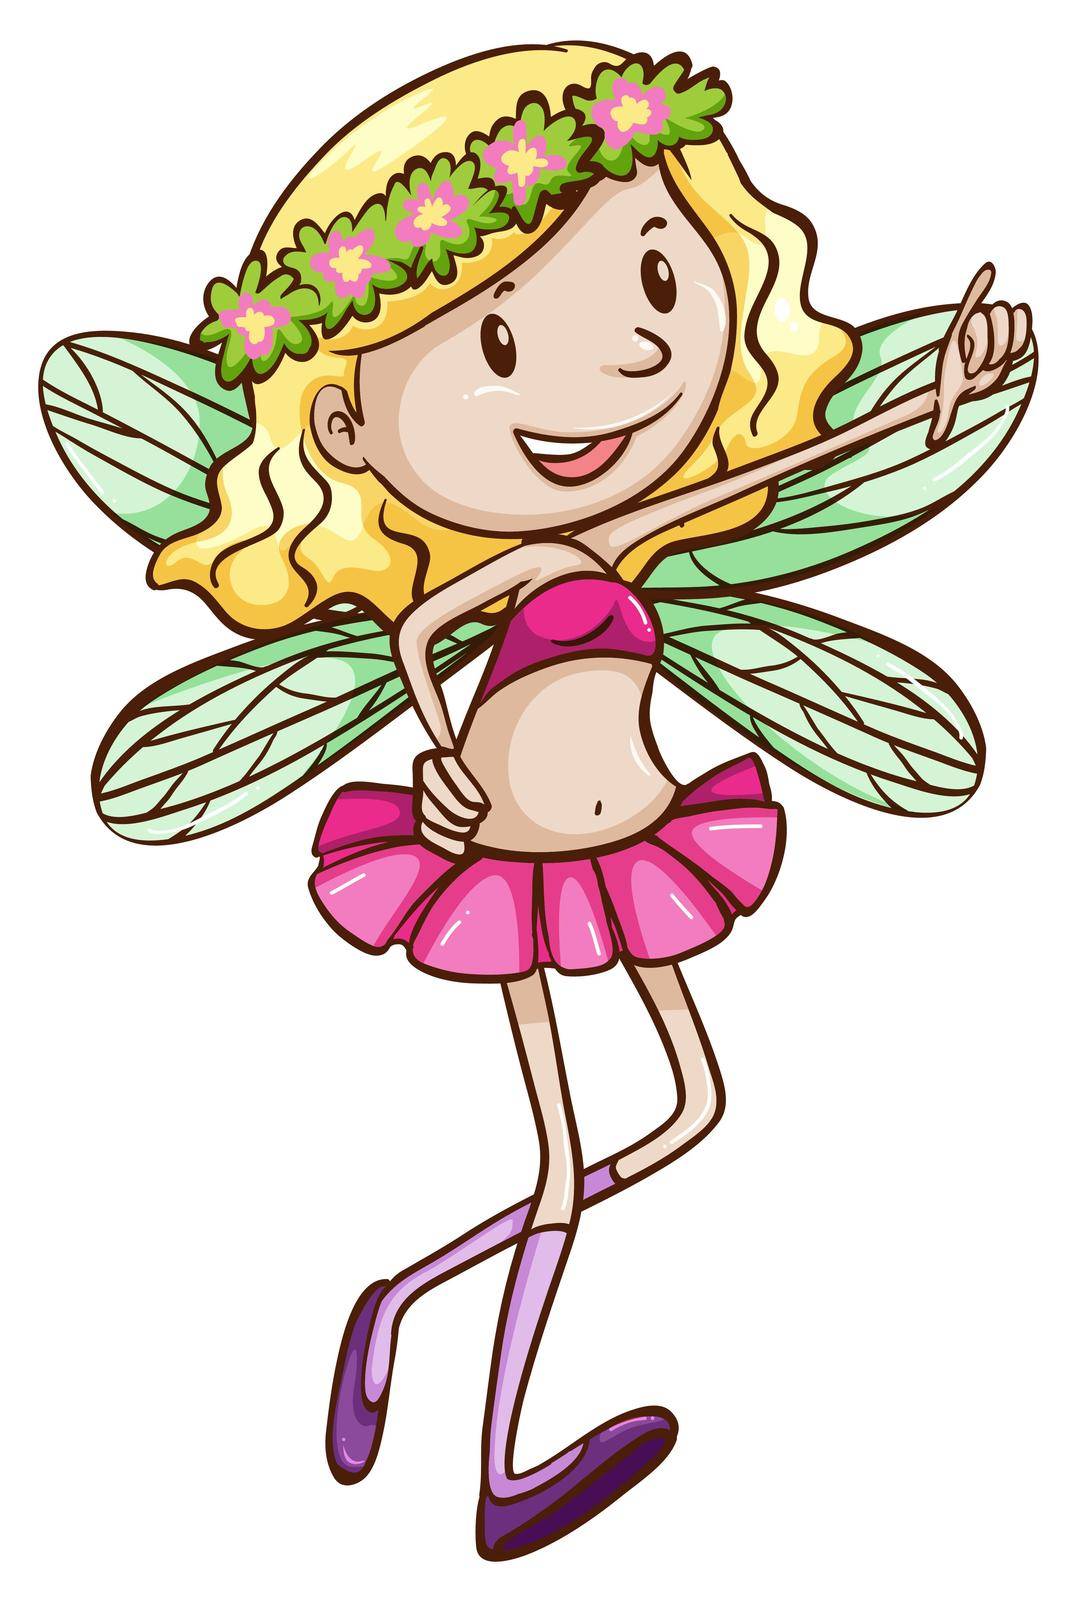 A cute fairy by iimages